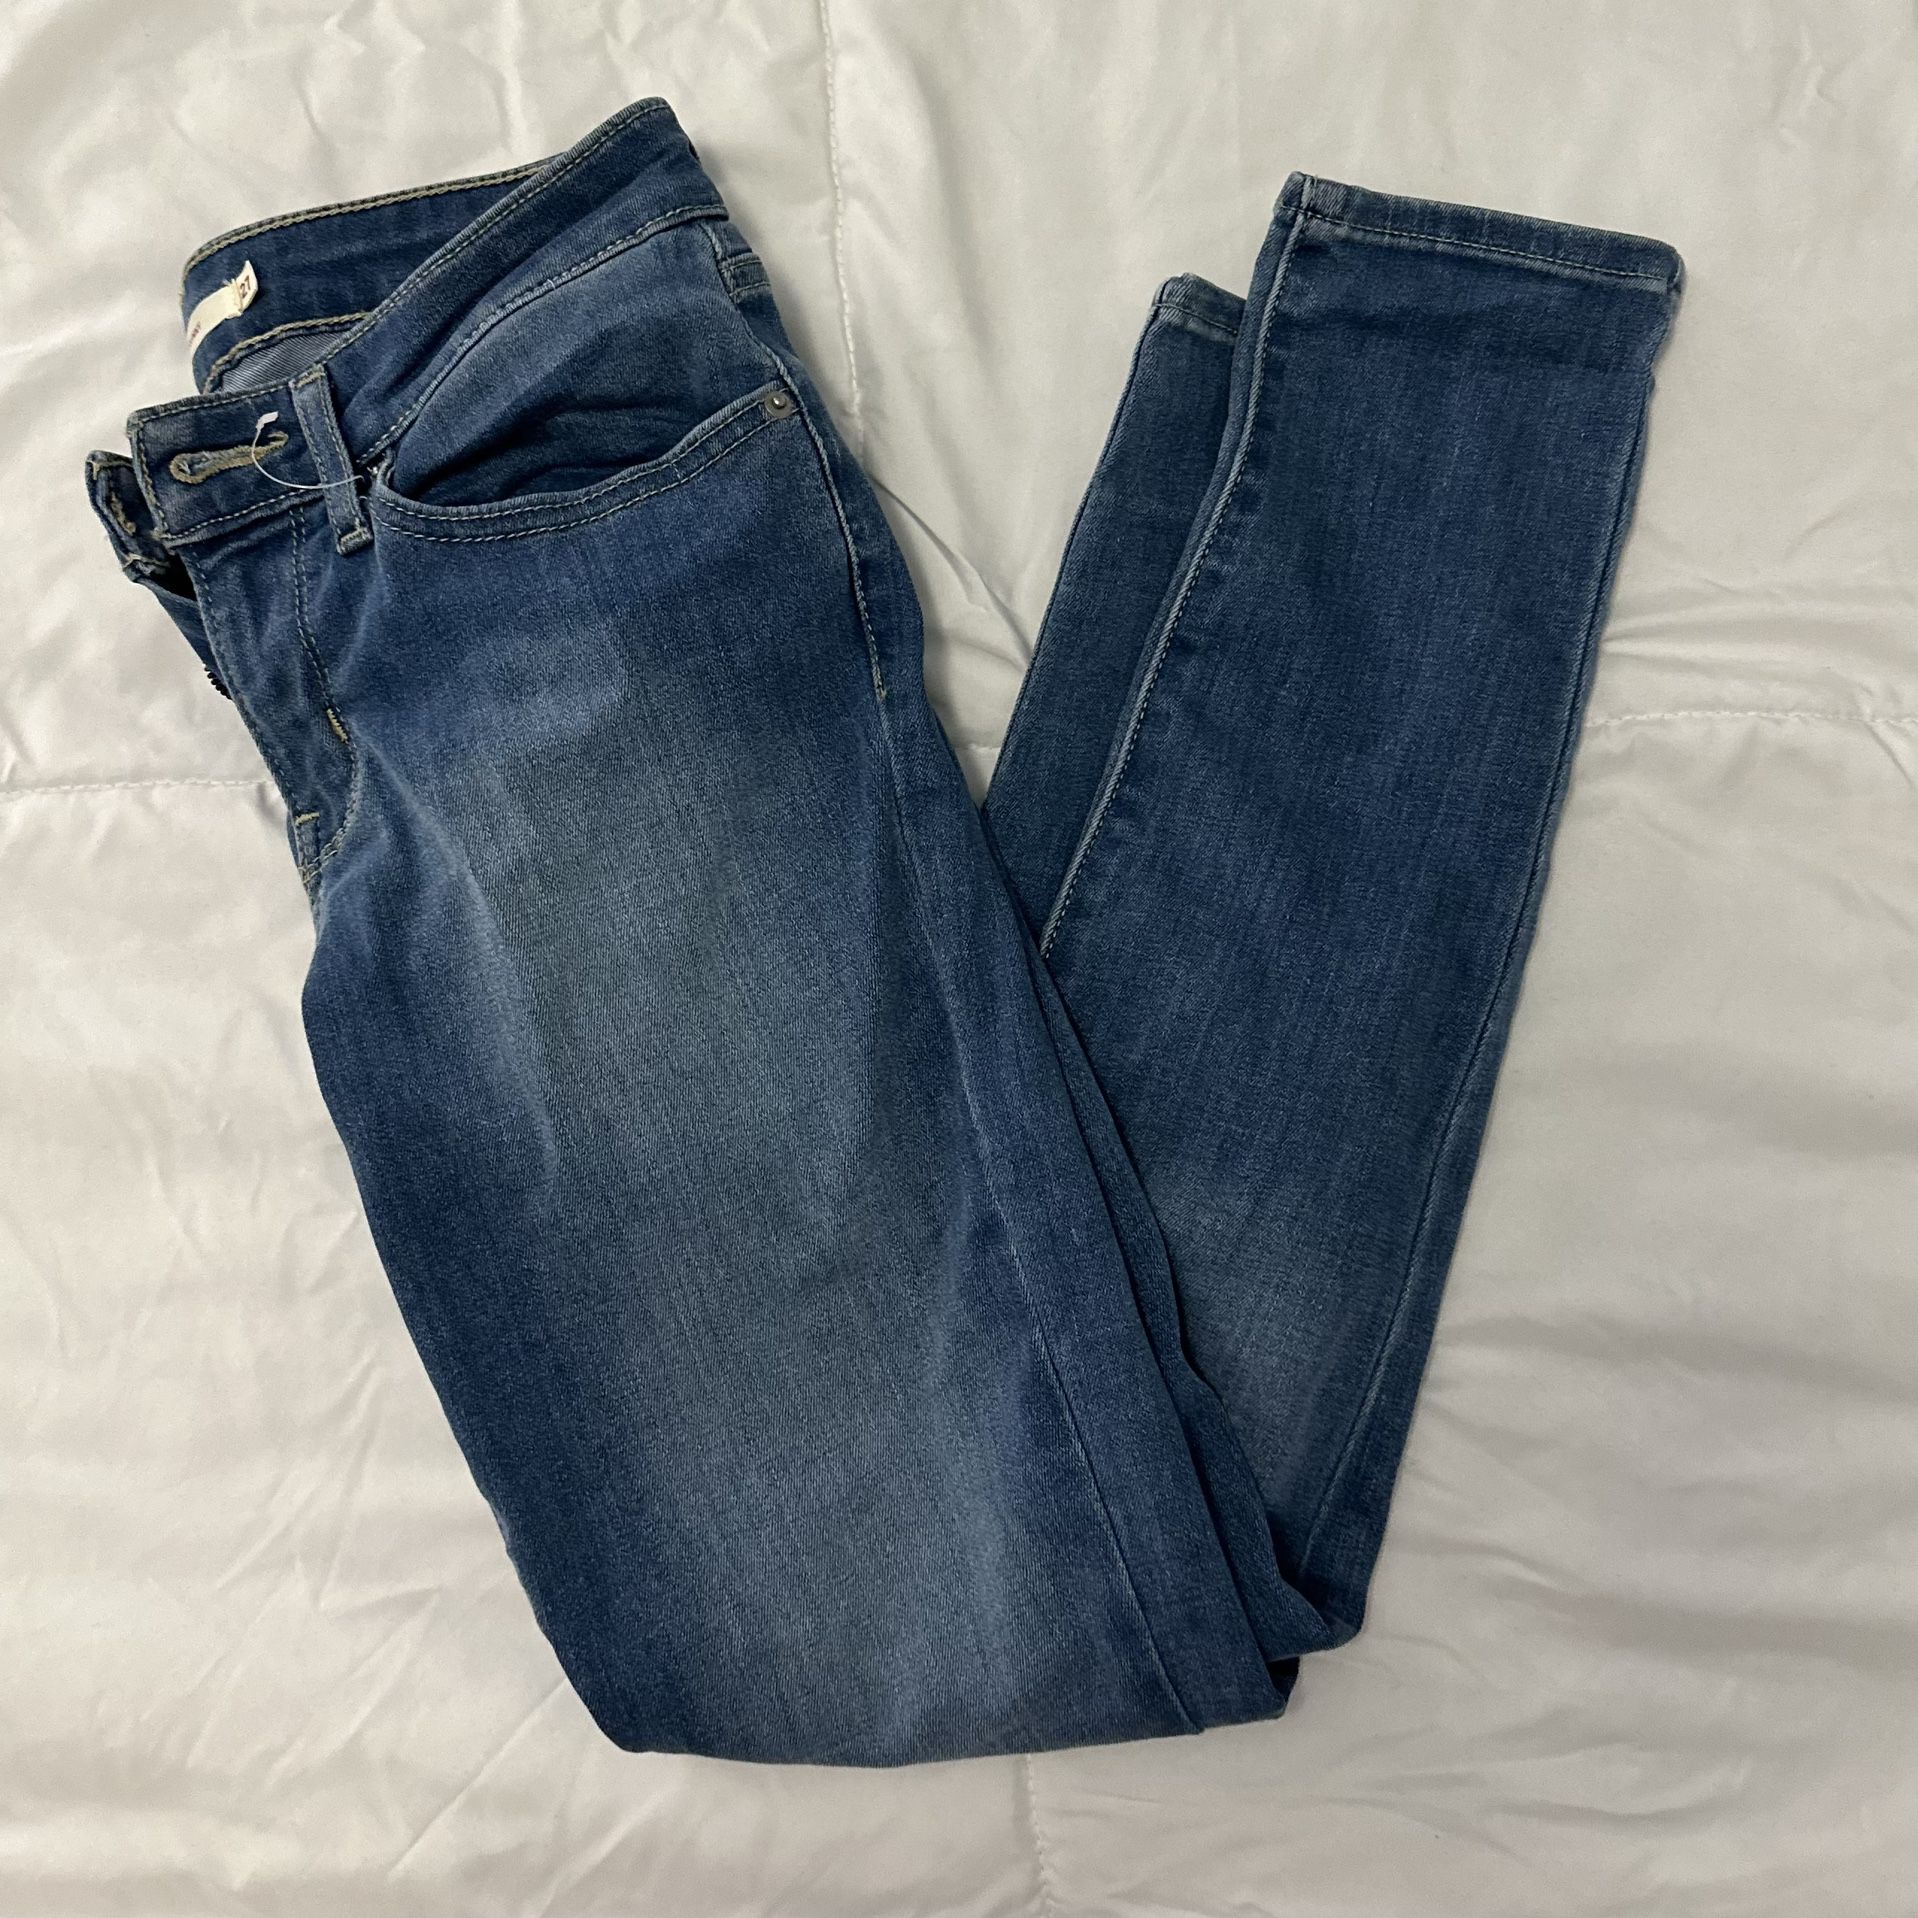 LEVI’S 711 SKINNY JEANS BRAND NEW WITHOUT TAGS SIZE 27” NWOT 